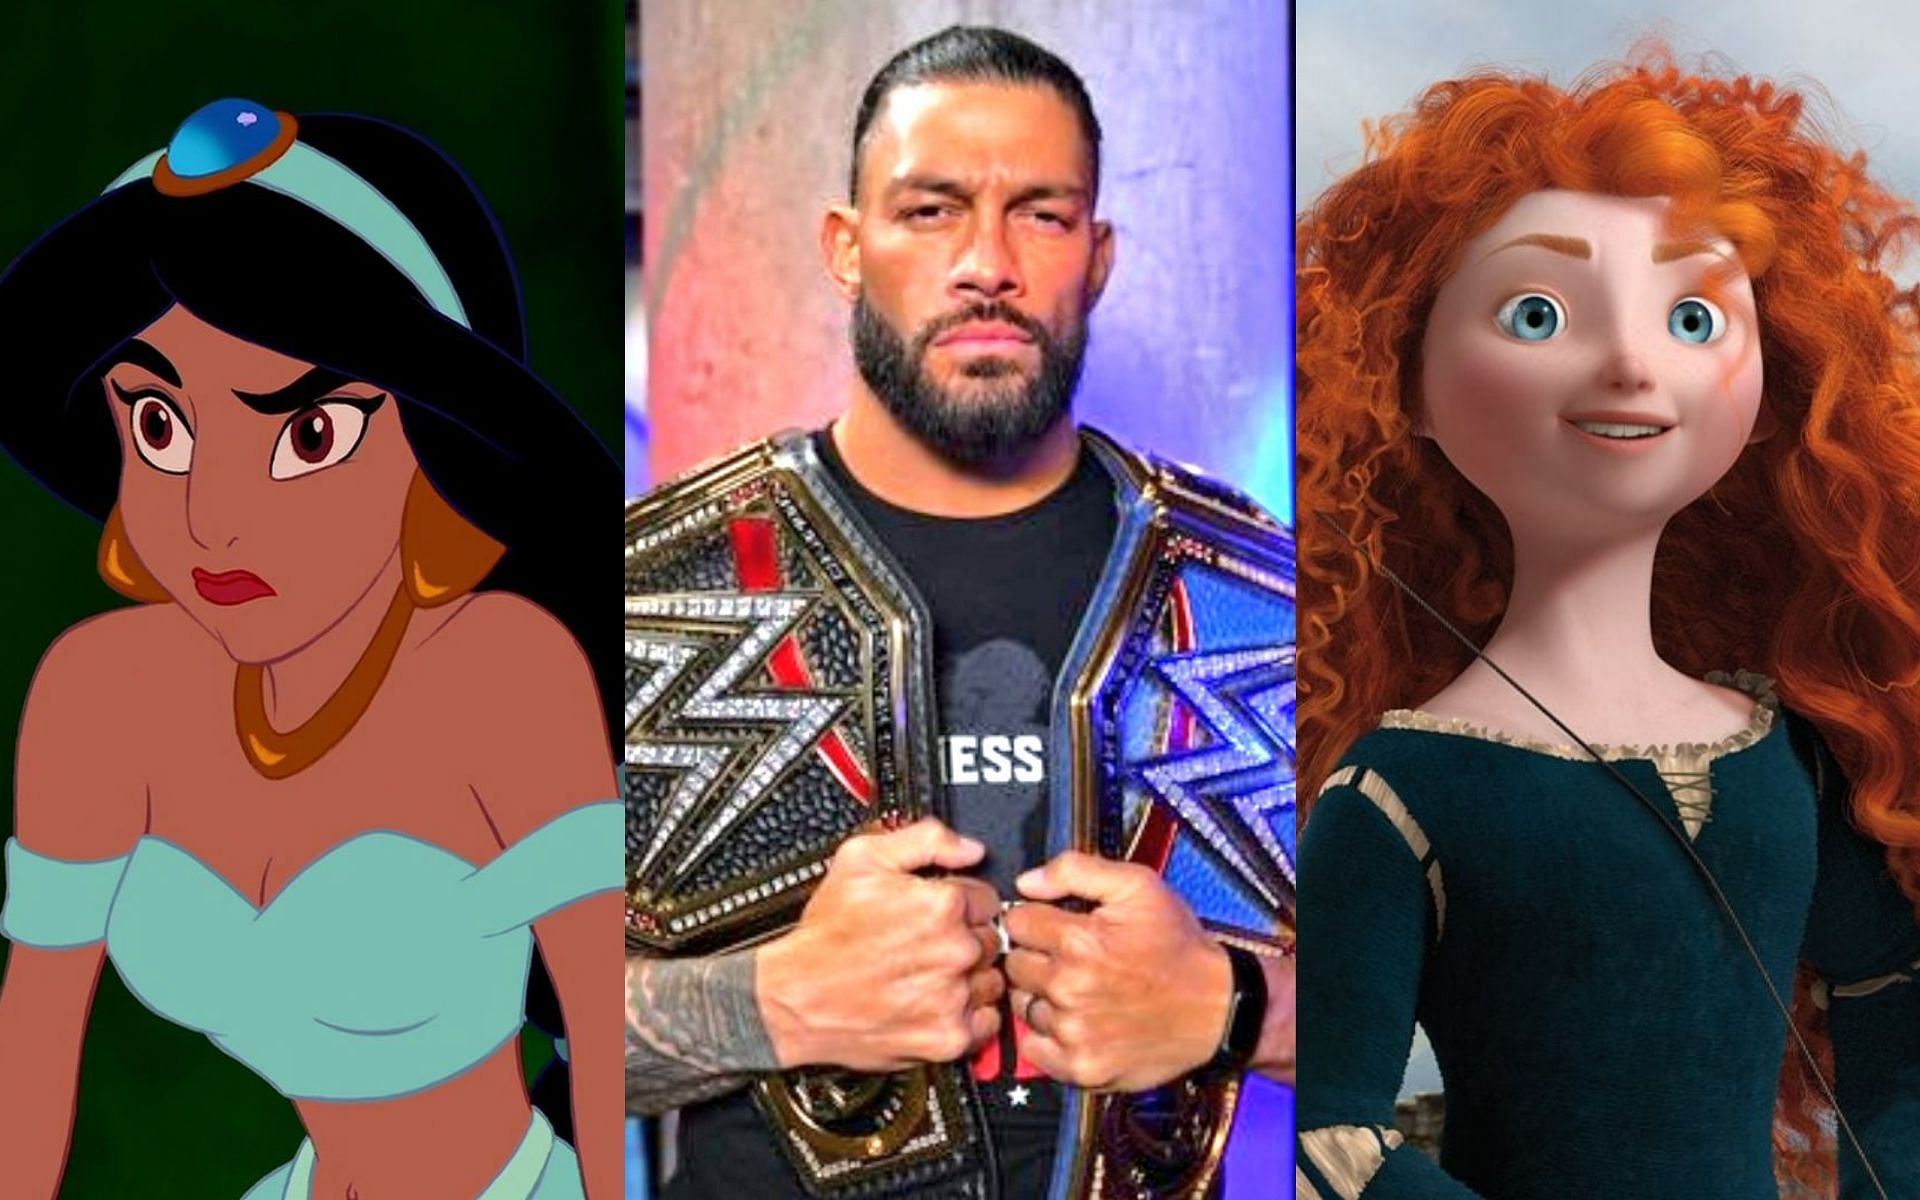 These WWE Superstars and some Disney Princesses have more in common than one could have thought.